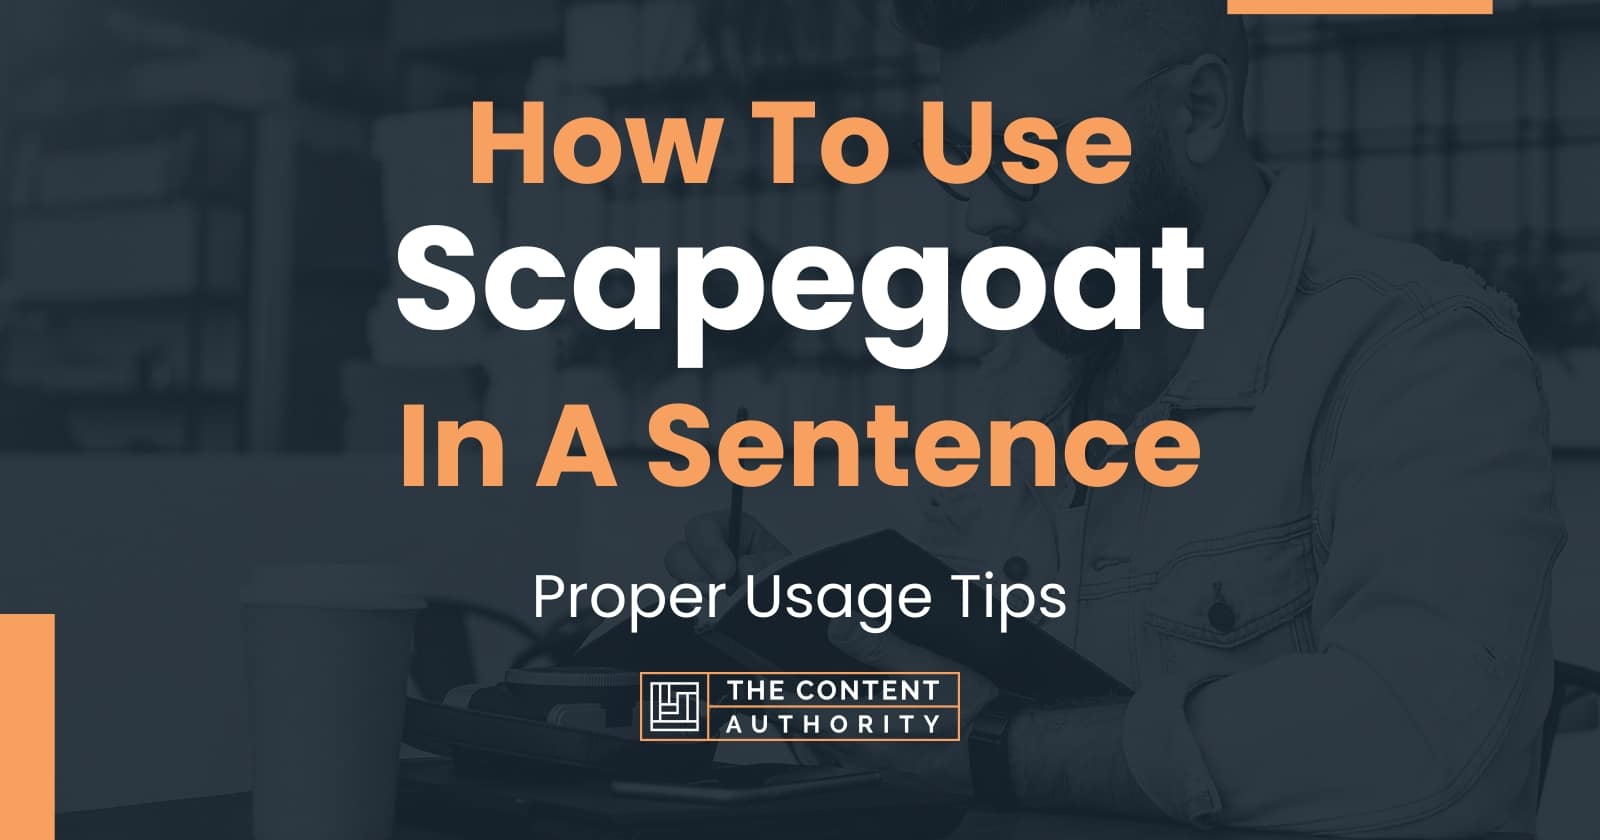 Scapegoat - Definition, Meaning & Synonyms